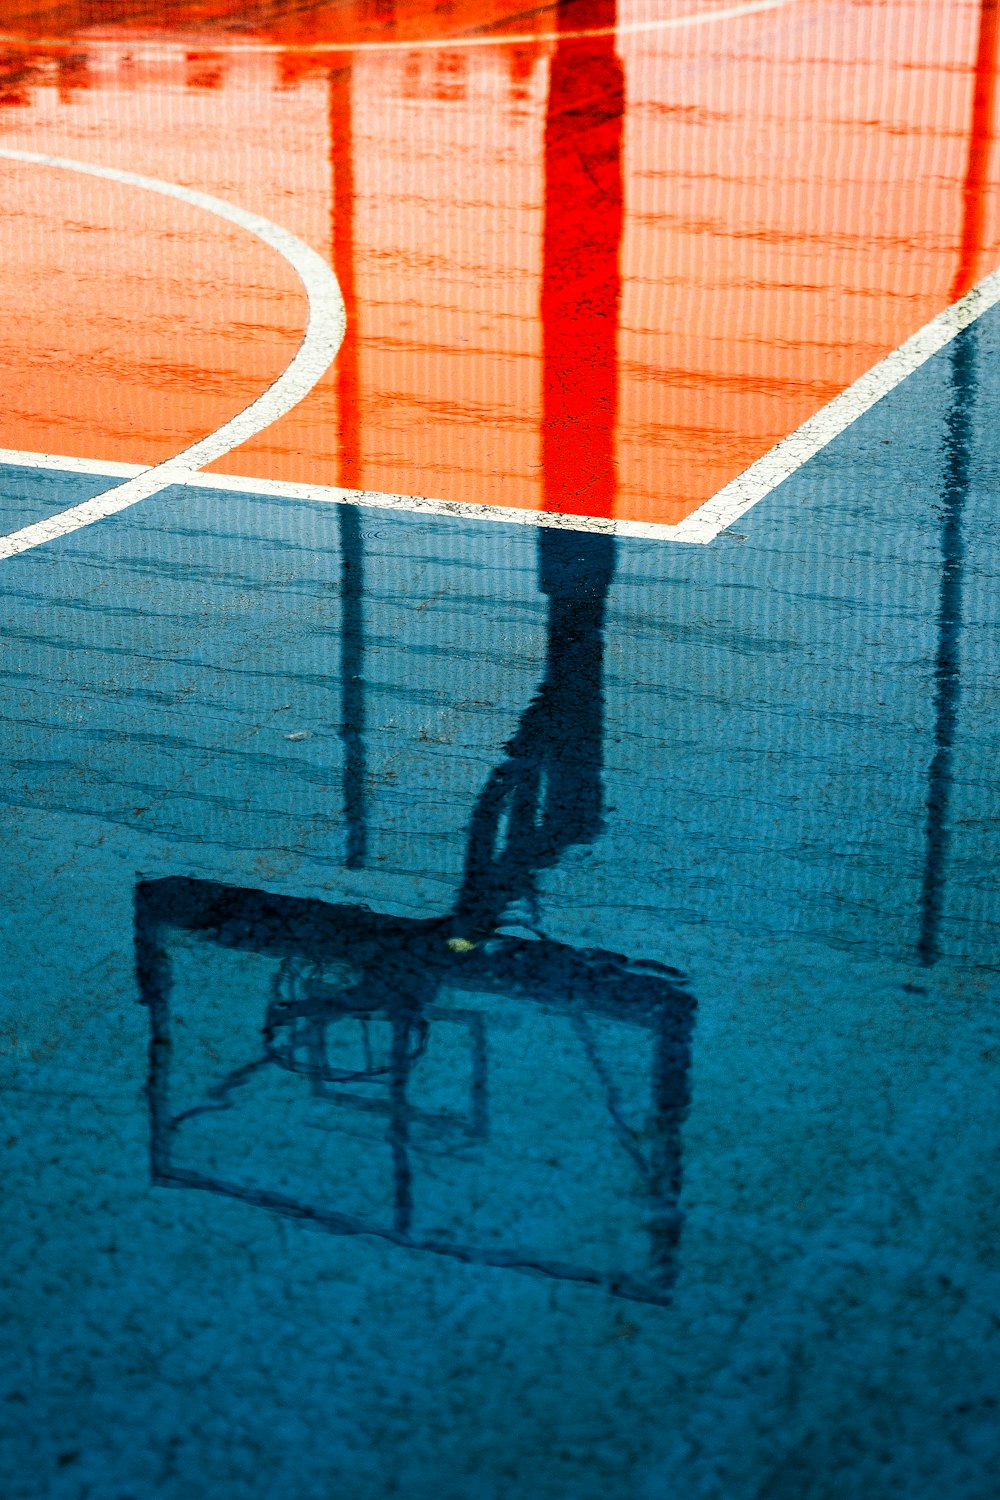 shadow of person on basketball court during daytime